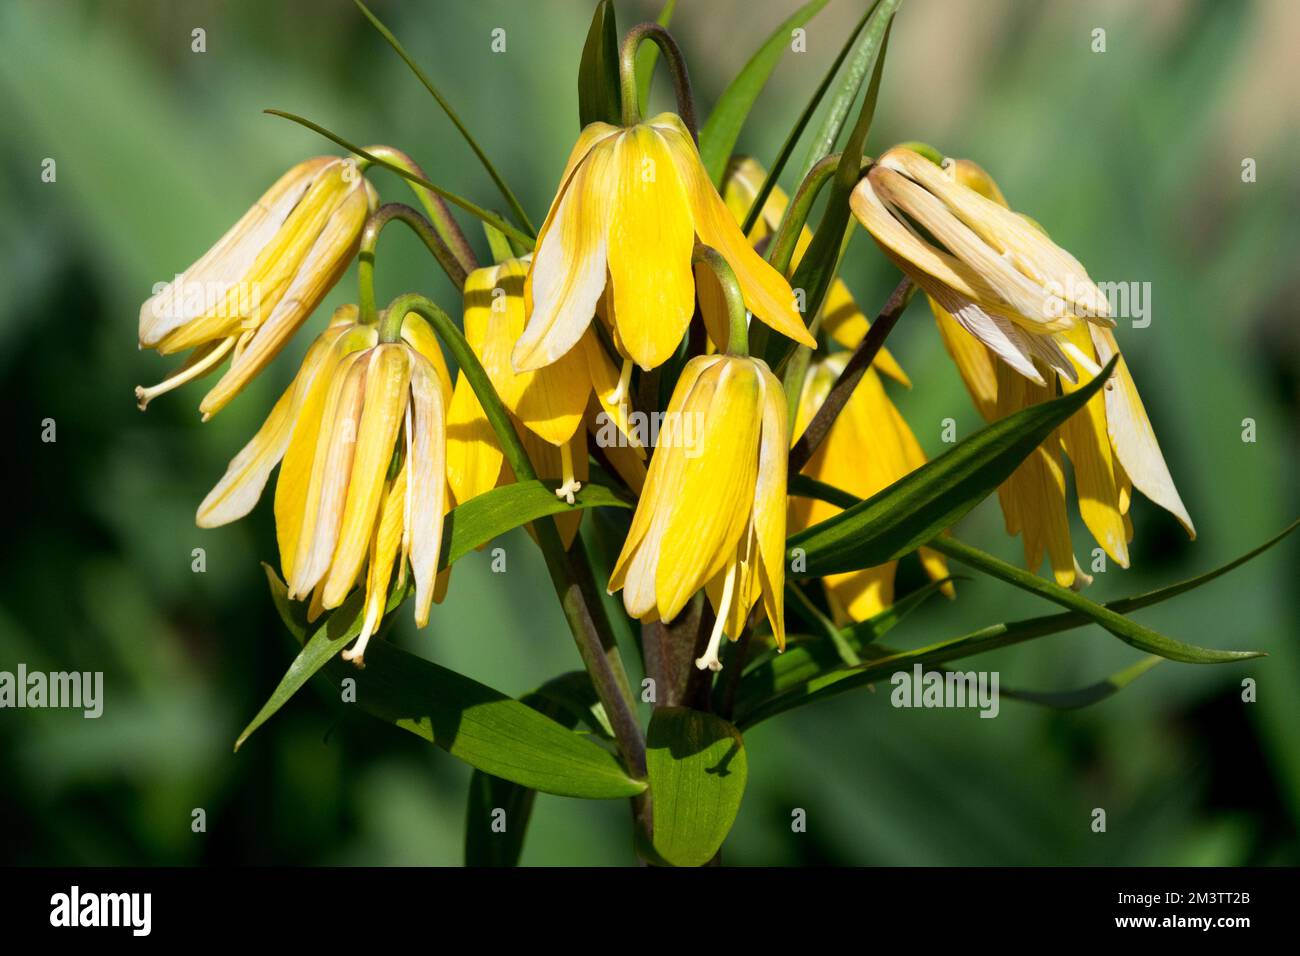 Crown Imperial Fritillary, Fritillaria imperialis 'Vivaldi', Flowers Spring, Pineapple Lily, Kings Crown Lily Stockfoto